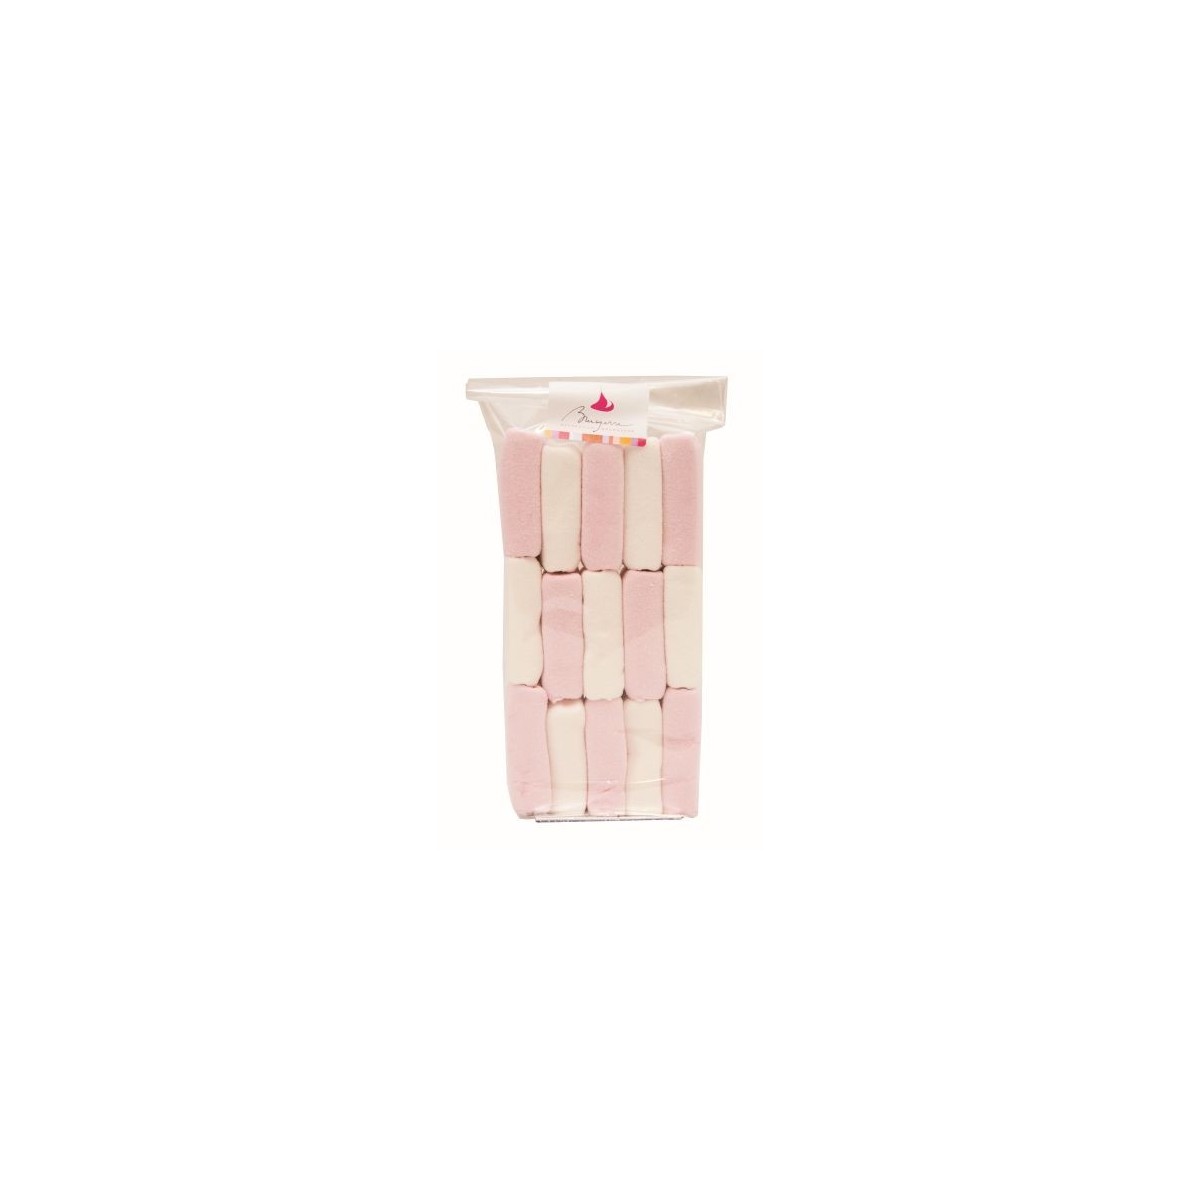 BRUYERRE CANDY LARD WHITE AND PINK IN BAGS 20 X 150GR  PIECE